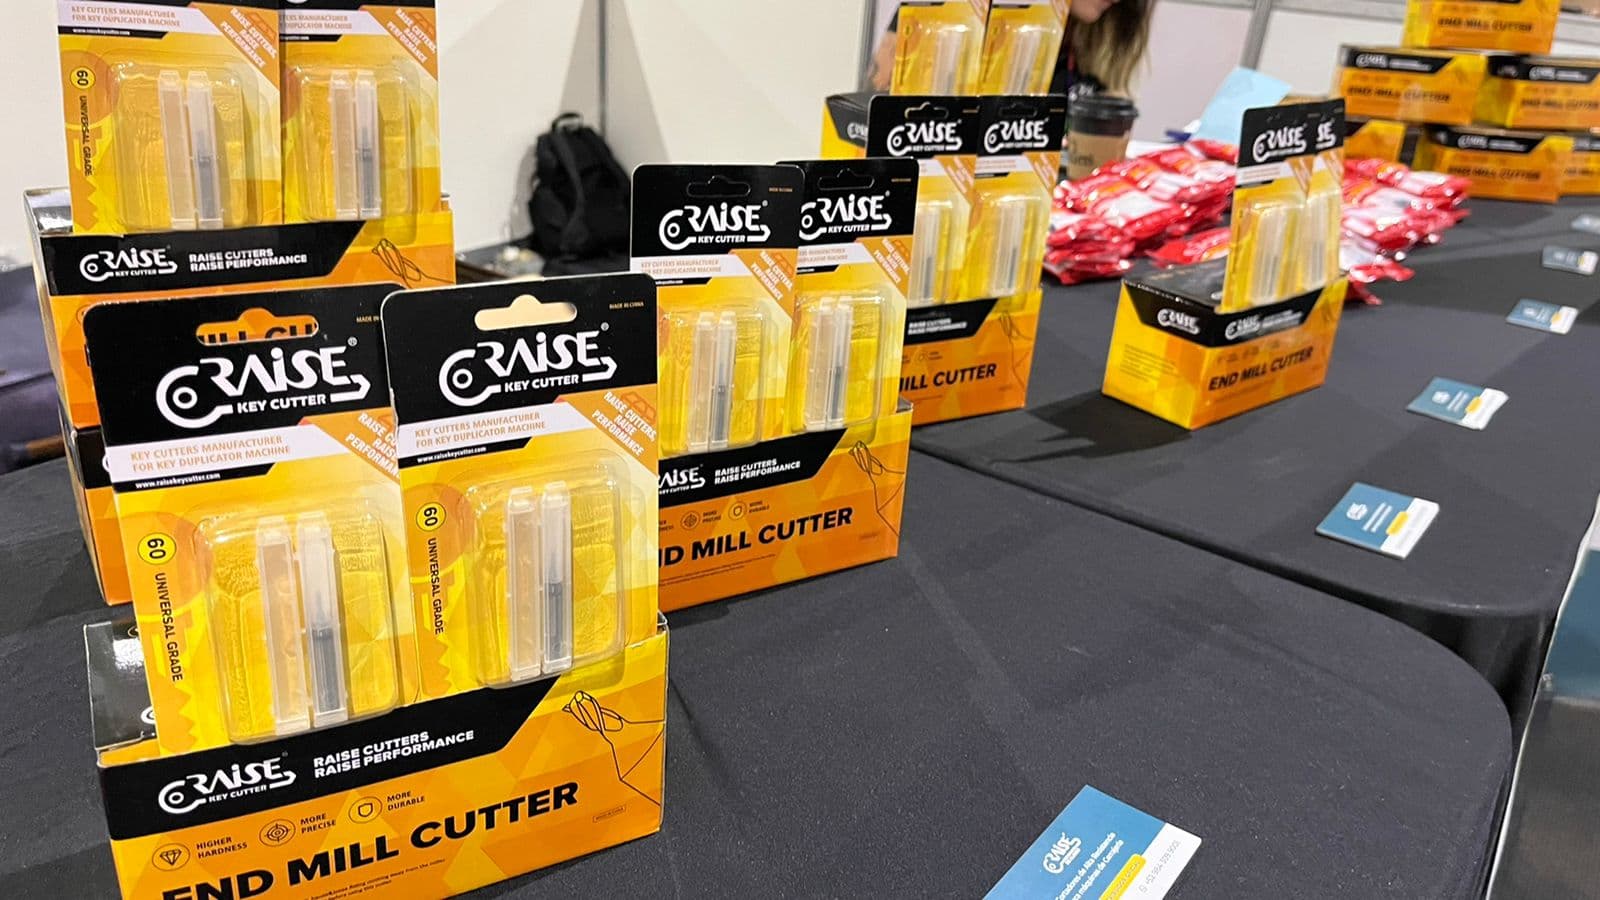 RAISE brand Key machine cutter launched at the Mexico fair